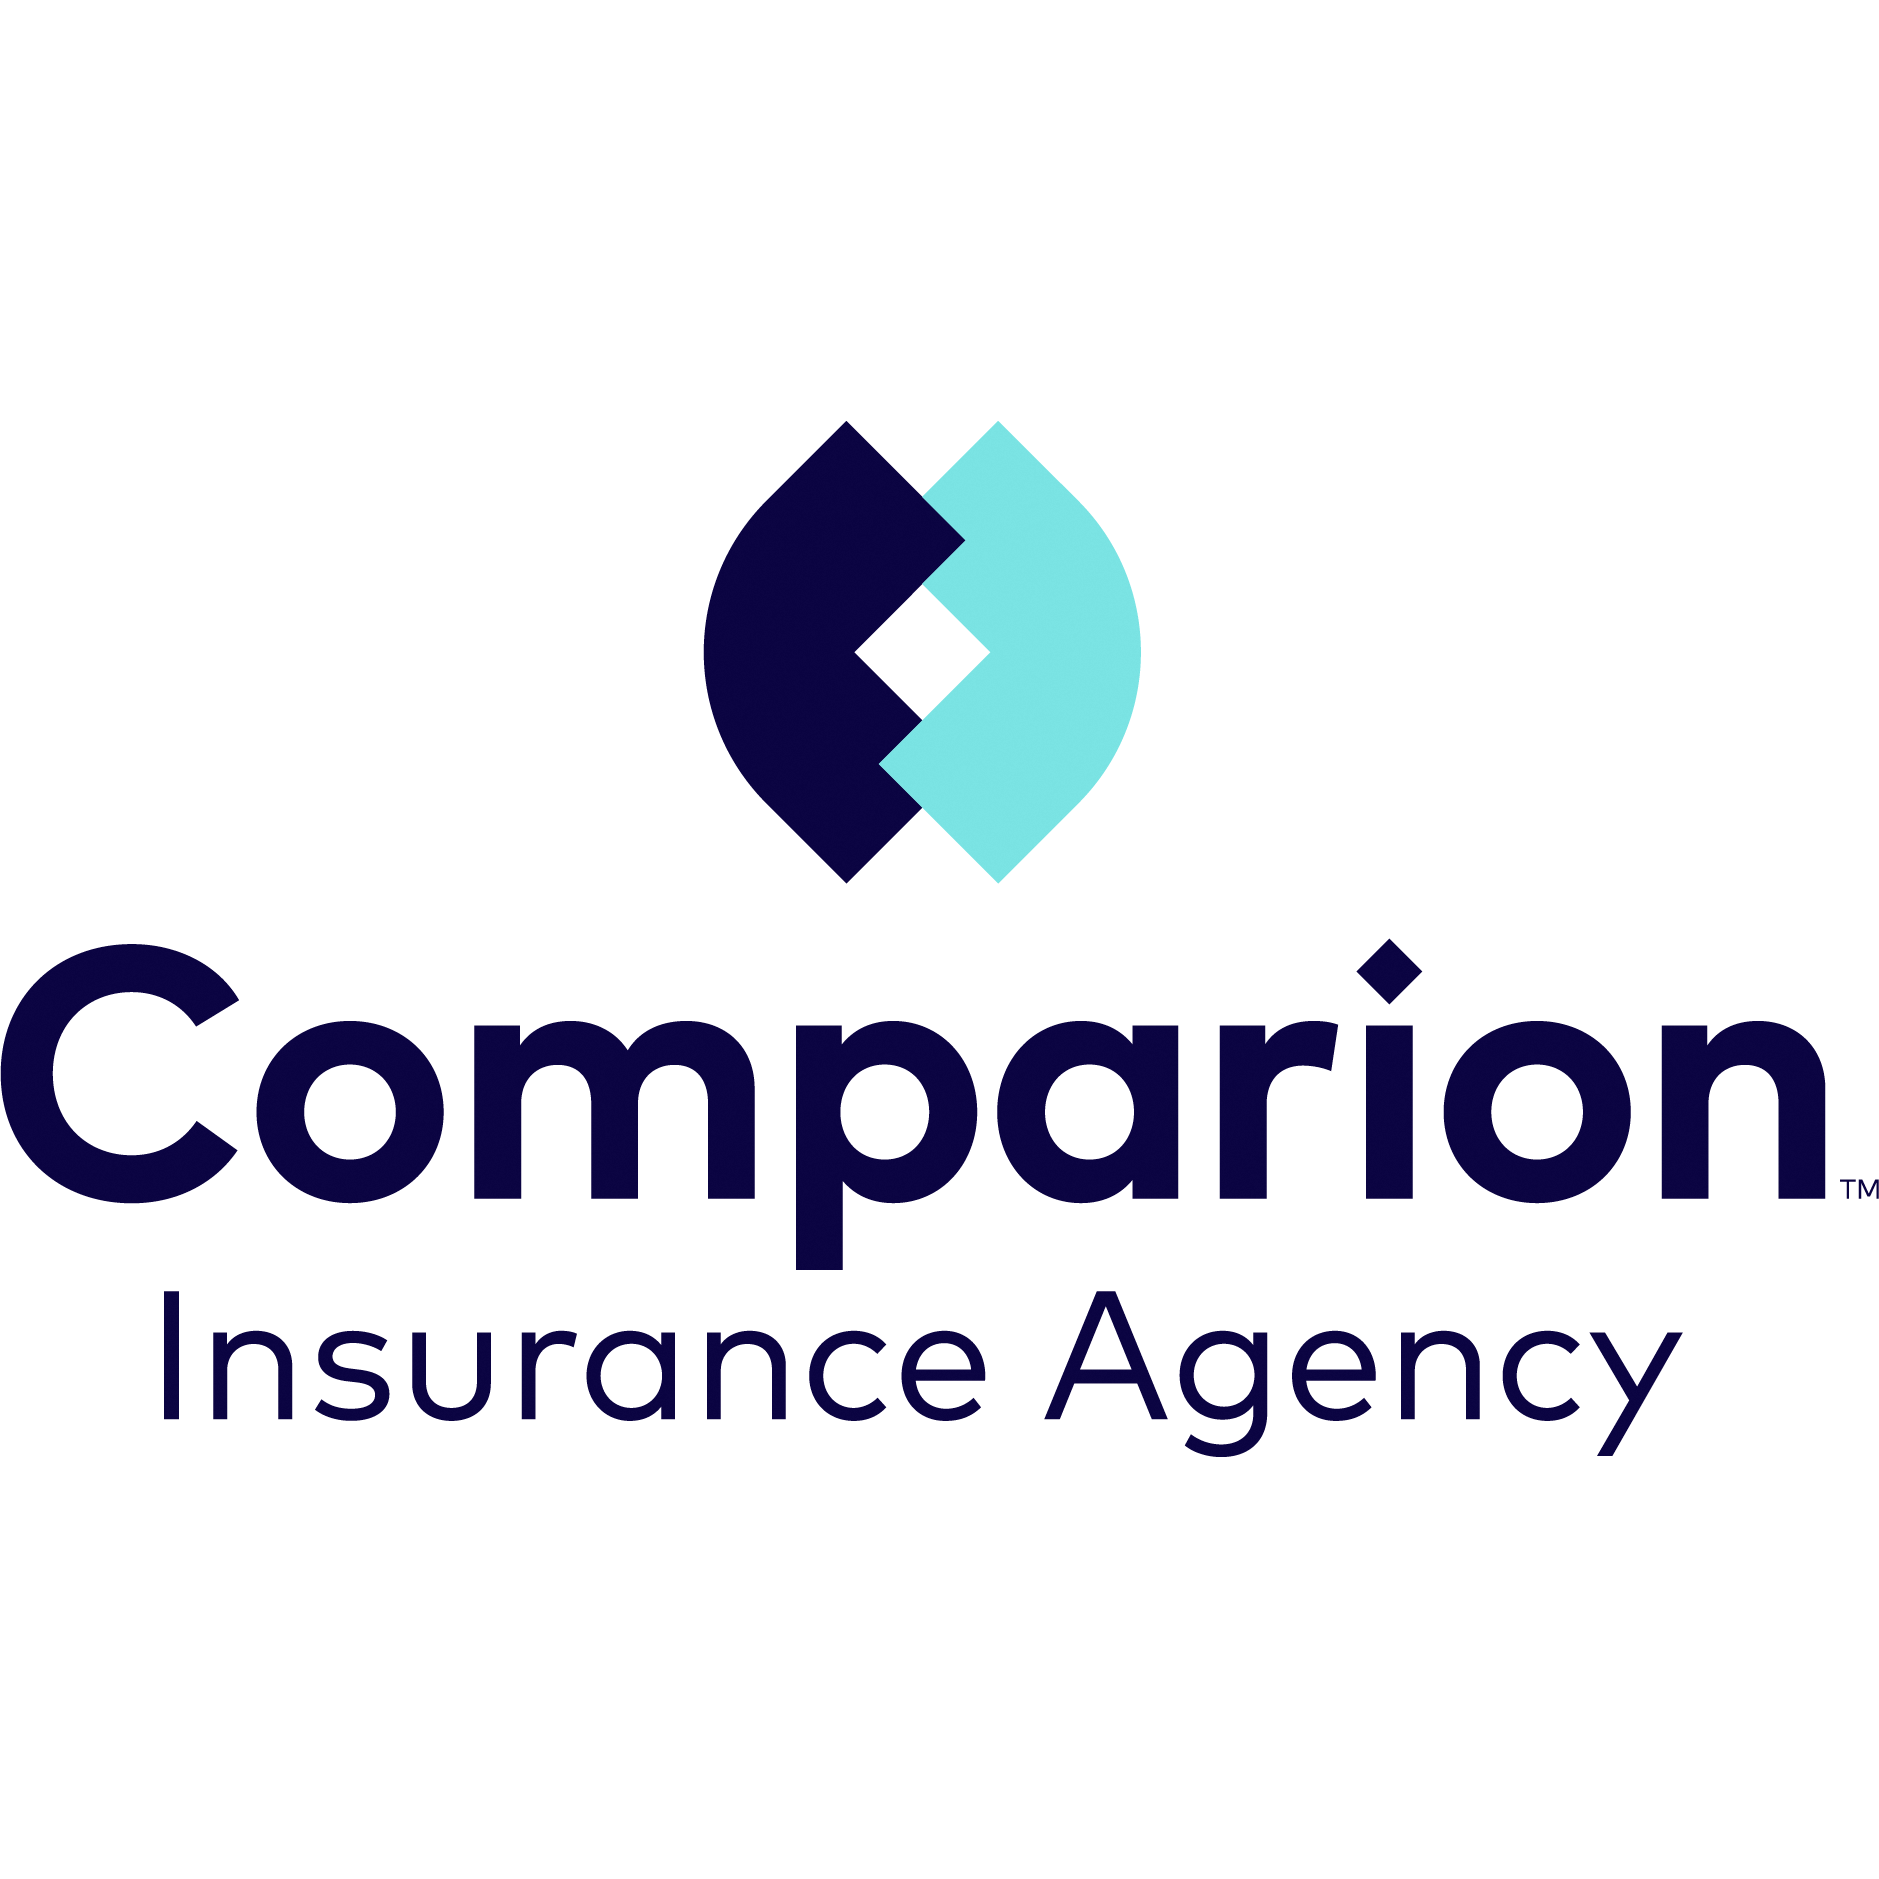 Adam Glasgow at Comparion Insurance Agency